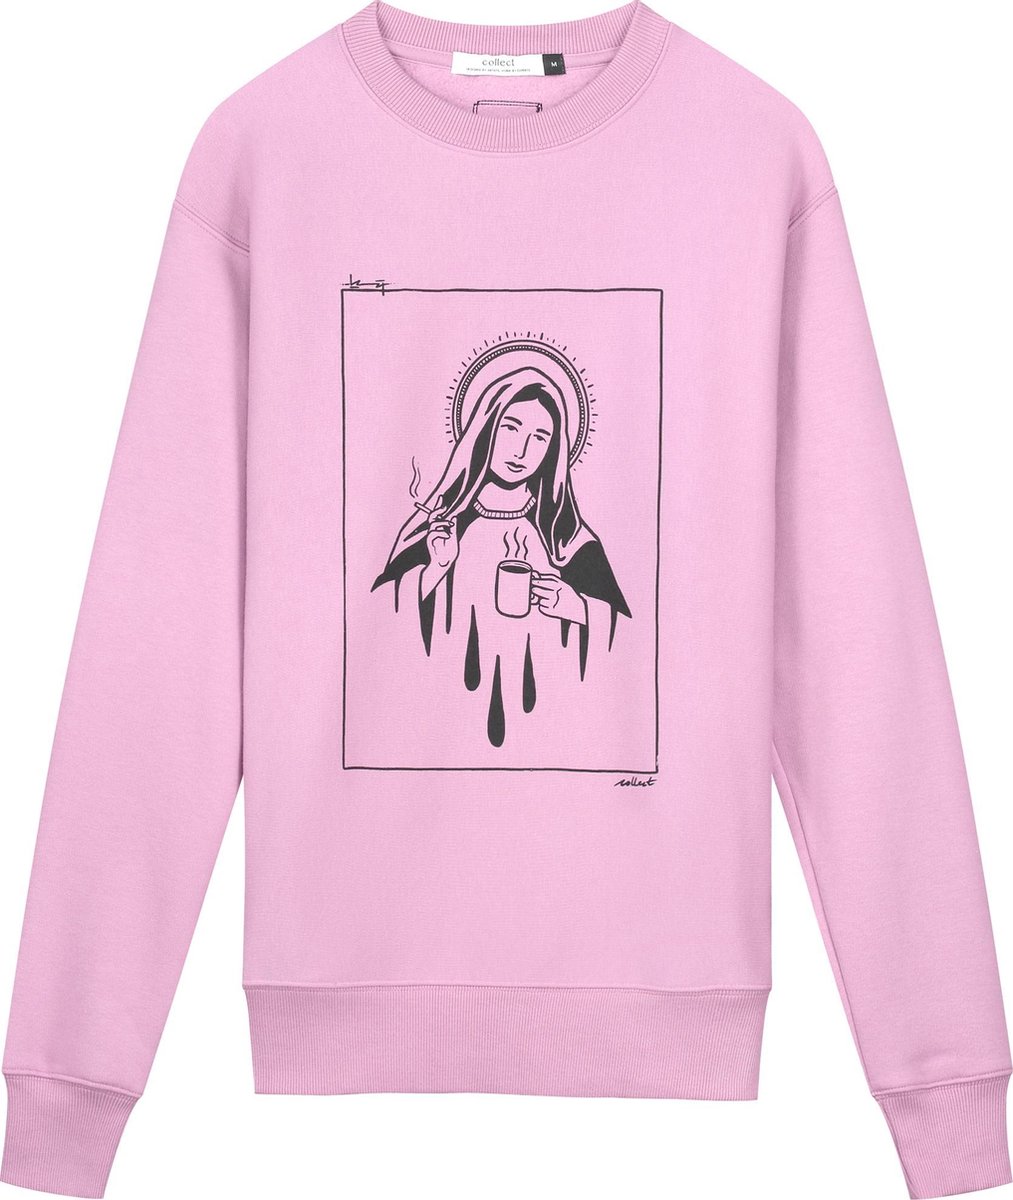 Collect The Label - Hippe Trui - Maria Sweater - Paars - Unisex - XXL